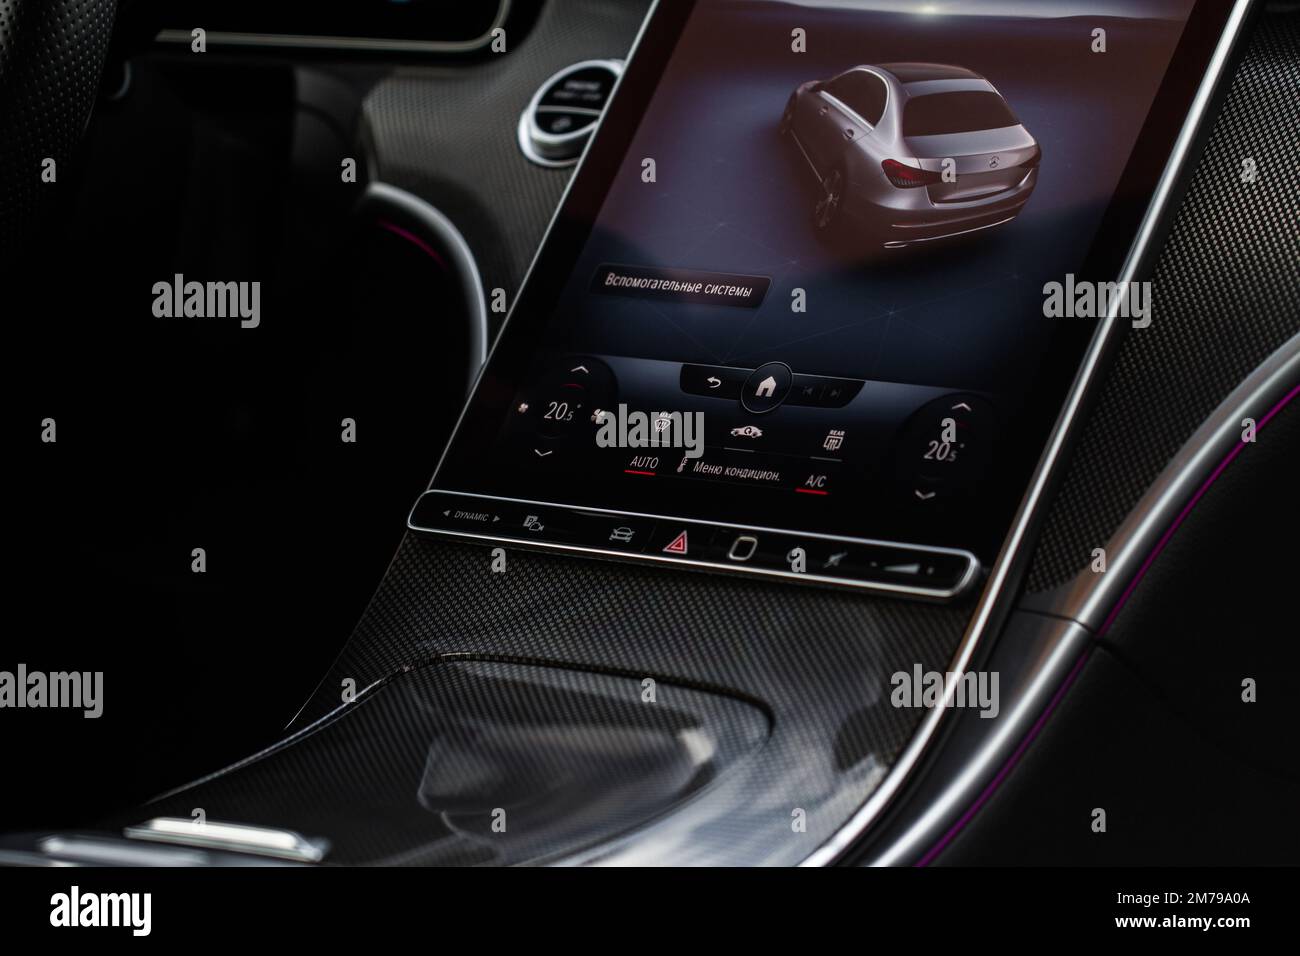 MOSCOW, RUSSIA - FEBRUARY 02, 2022. Mercedes-Benz C-Class 200 (W206), interior view. Interior close up view. Touchscreen monitor on the dashboard of t Stock Photo